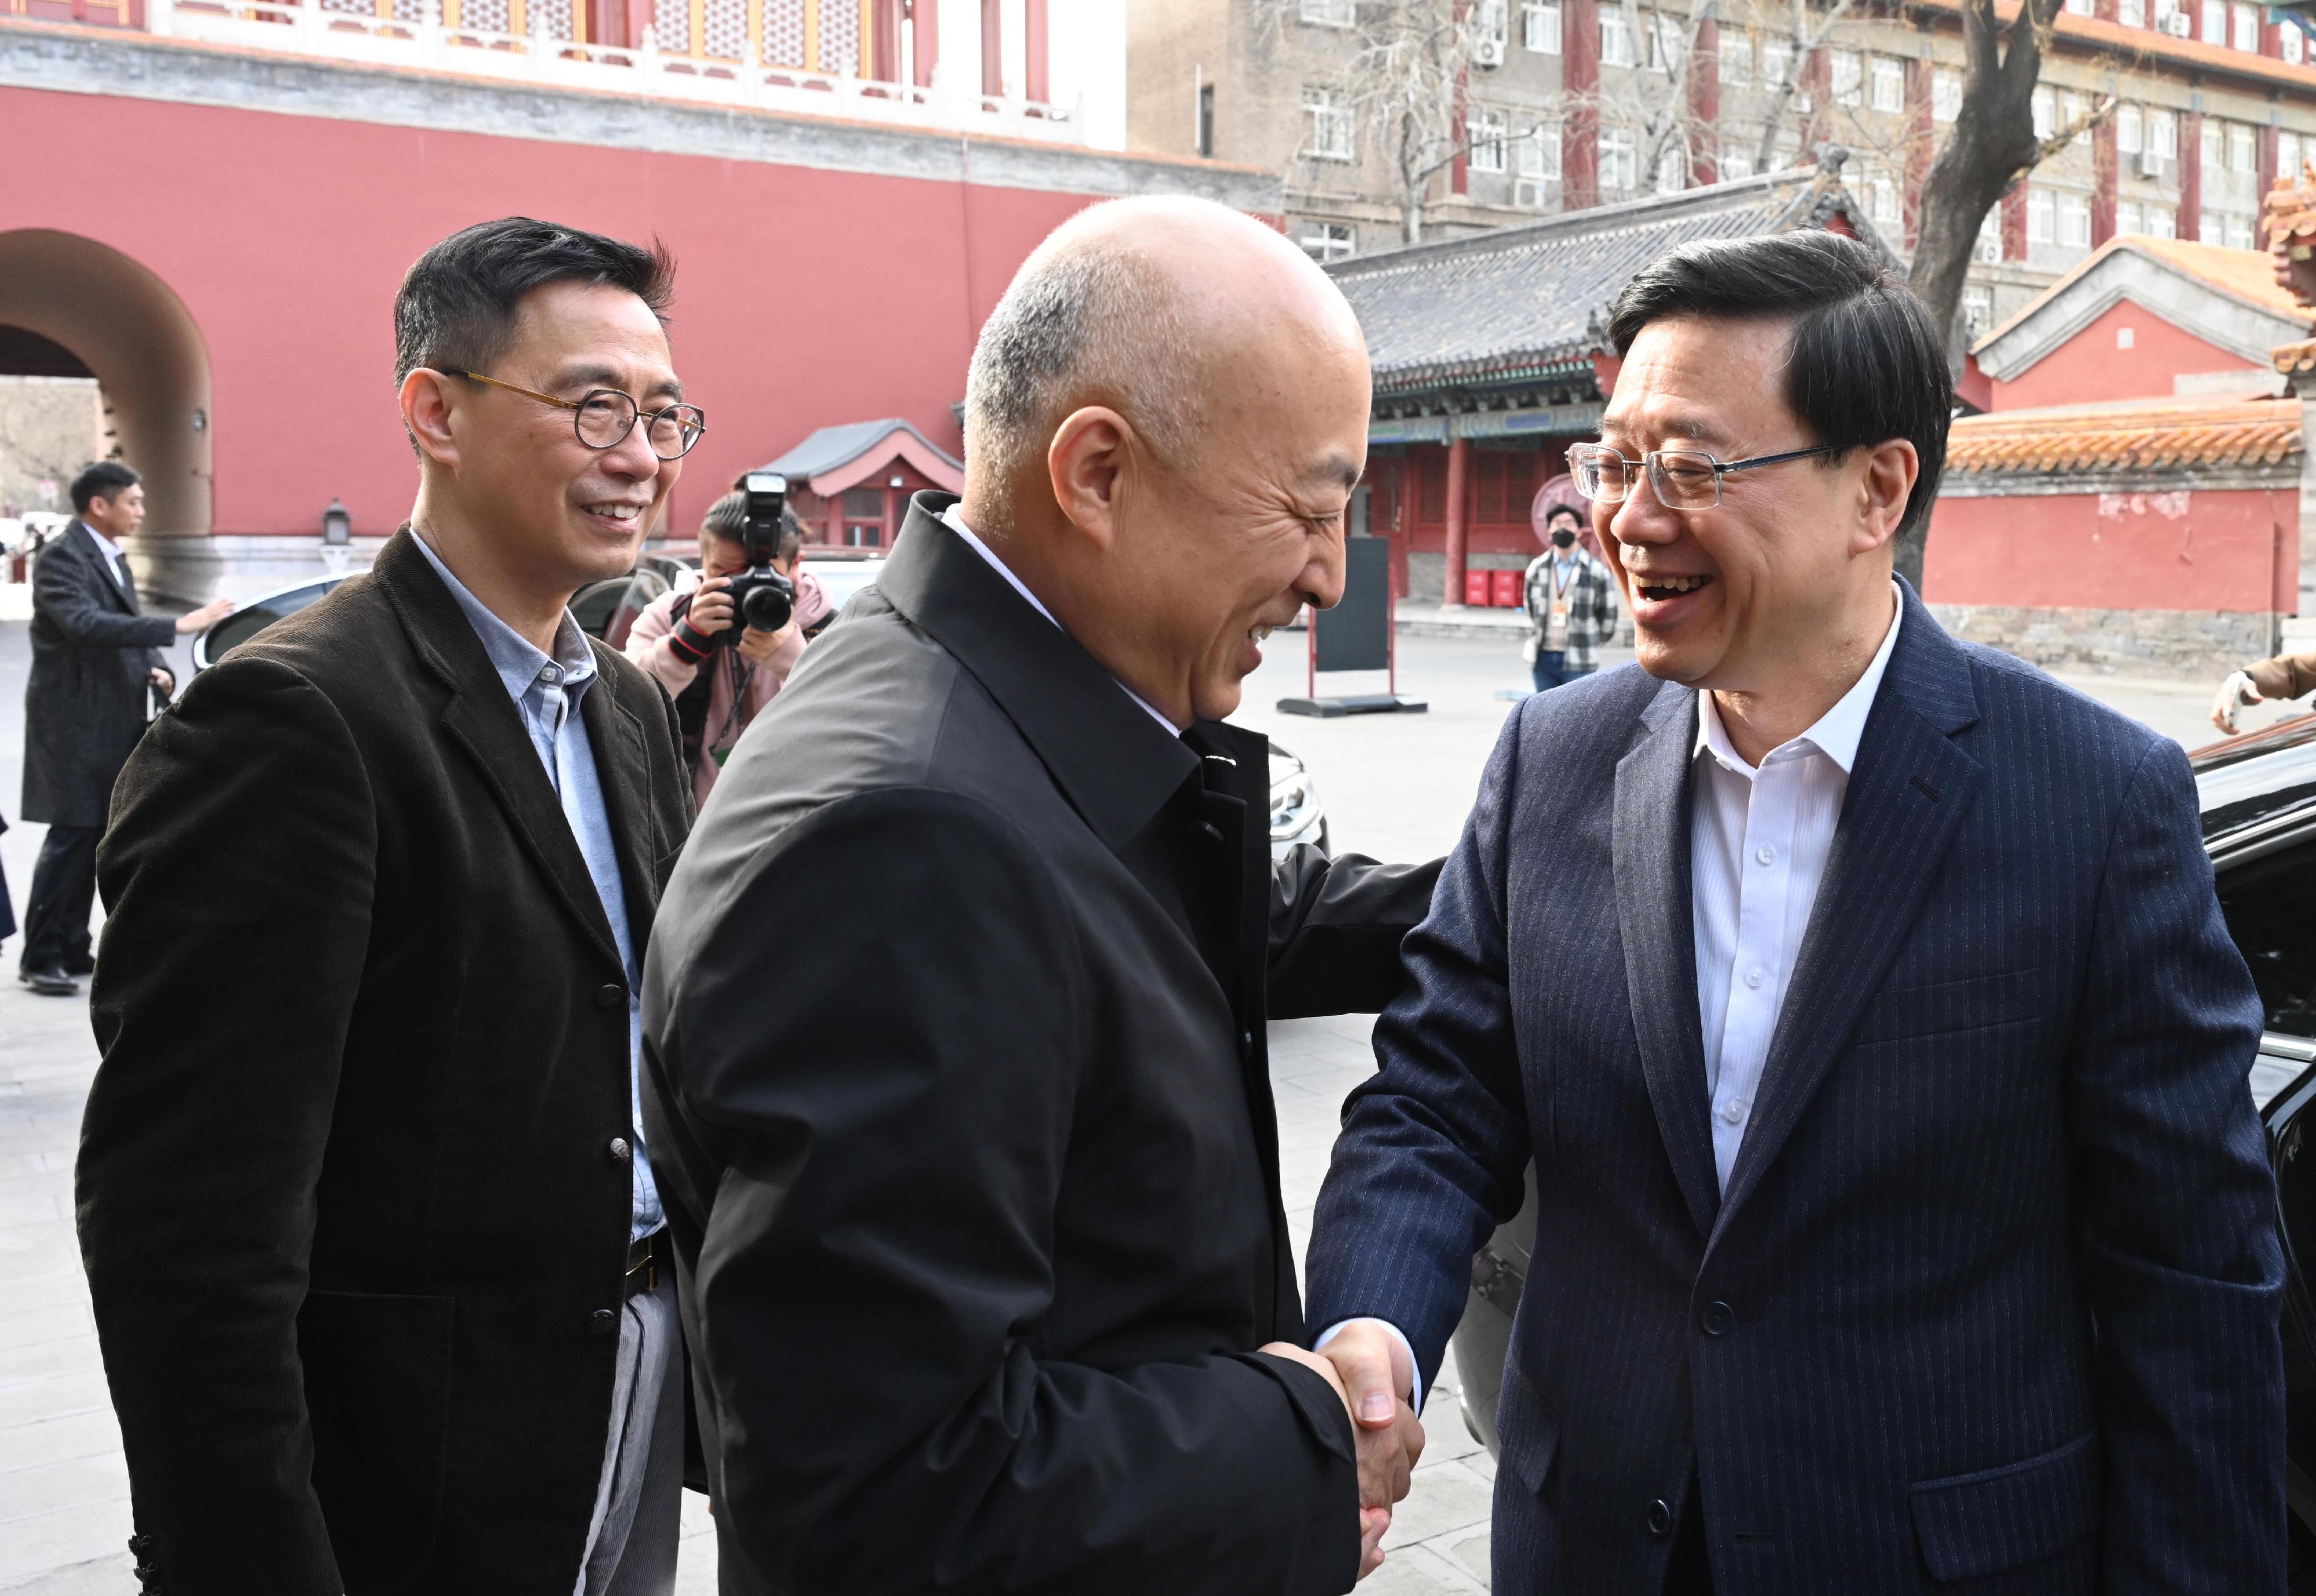 The Chief Executive, Mr John Lee, continued his visit in Beijing today (March 14). Accompanied by the Secretary for Culture, Sports and Tourism, Mr Kevin Yeung (left), Mr Lee visited the Palace Museum this afternoon. Photo shows Mr Lee (right) shaking hands with the Director of the Palace Museum, Dr Wang Xudong (centre).